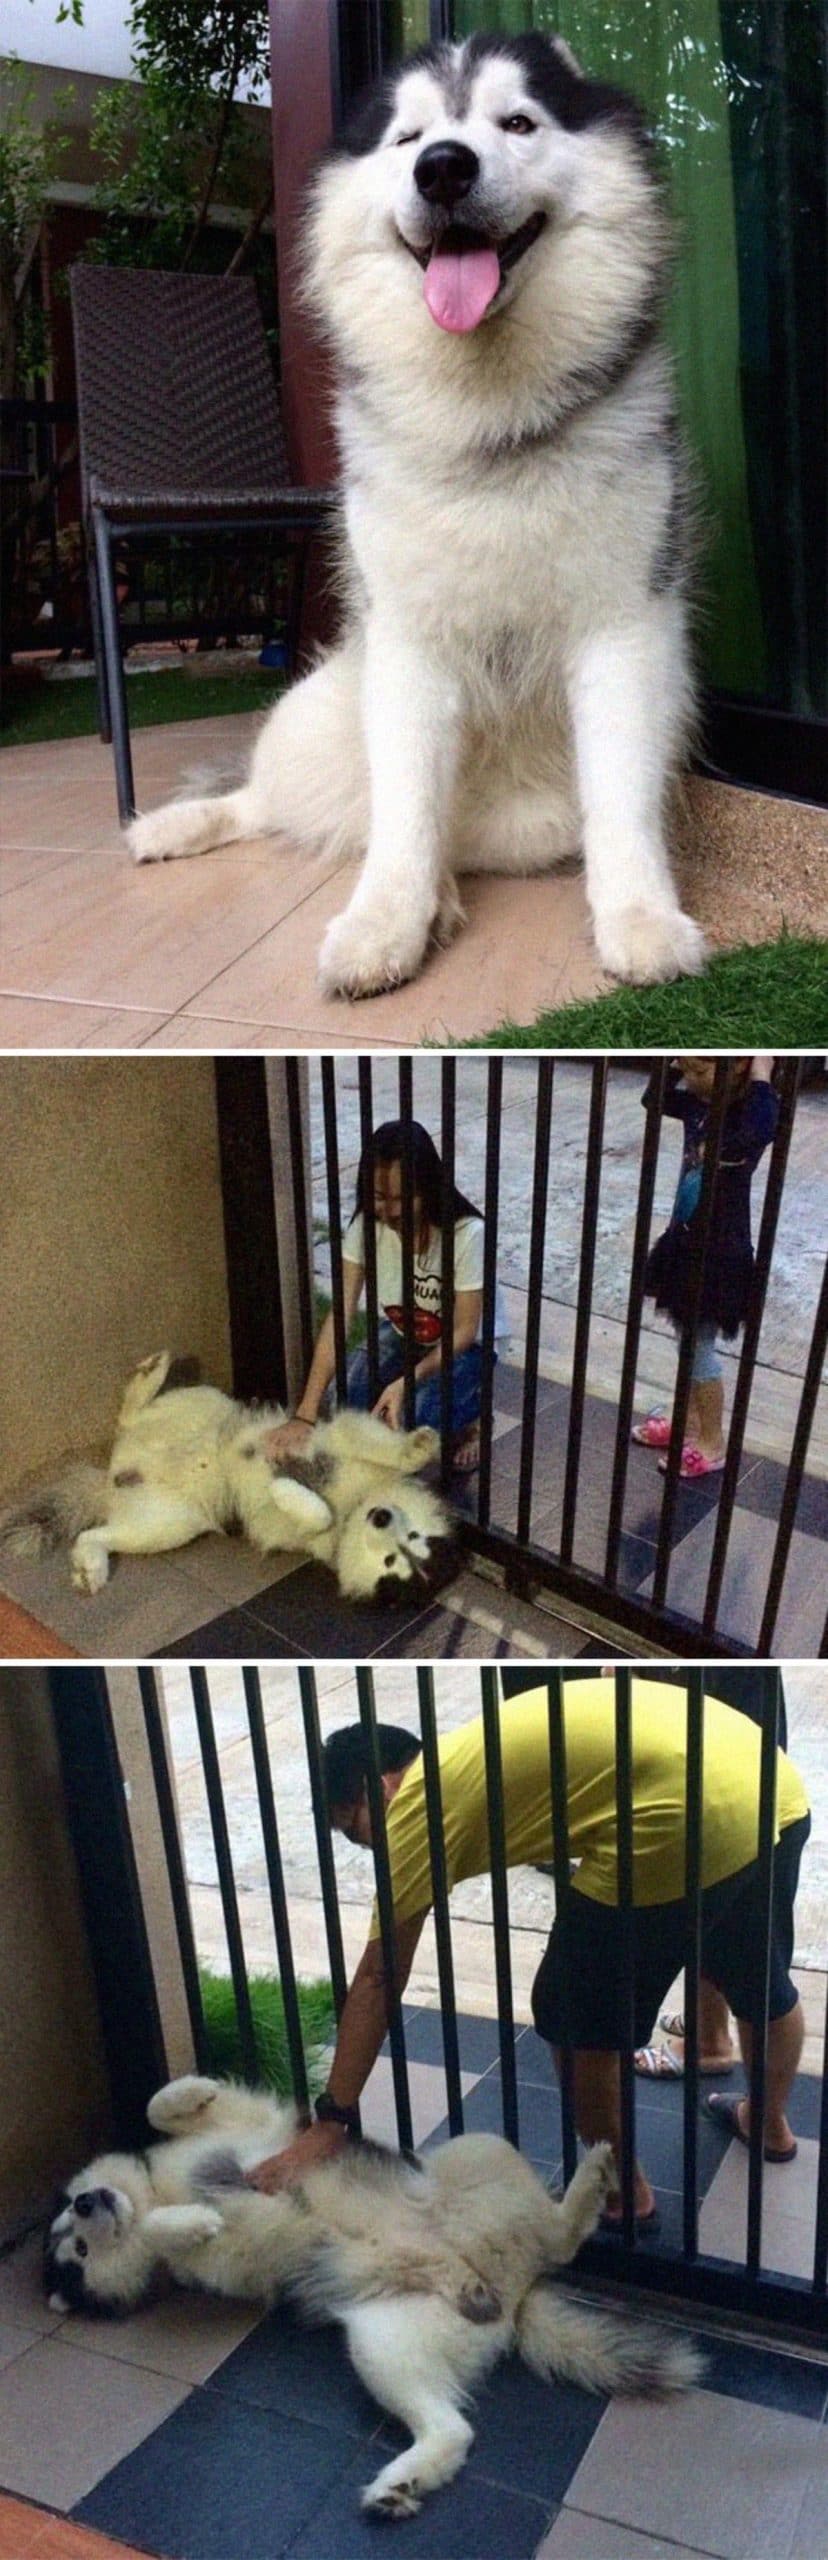 1 photo of black and white husky sitting on the floor with the tongue out and 2 photos of the dog laying belly up by a gate and people petting it